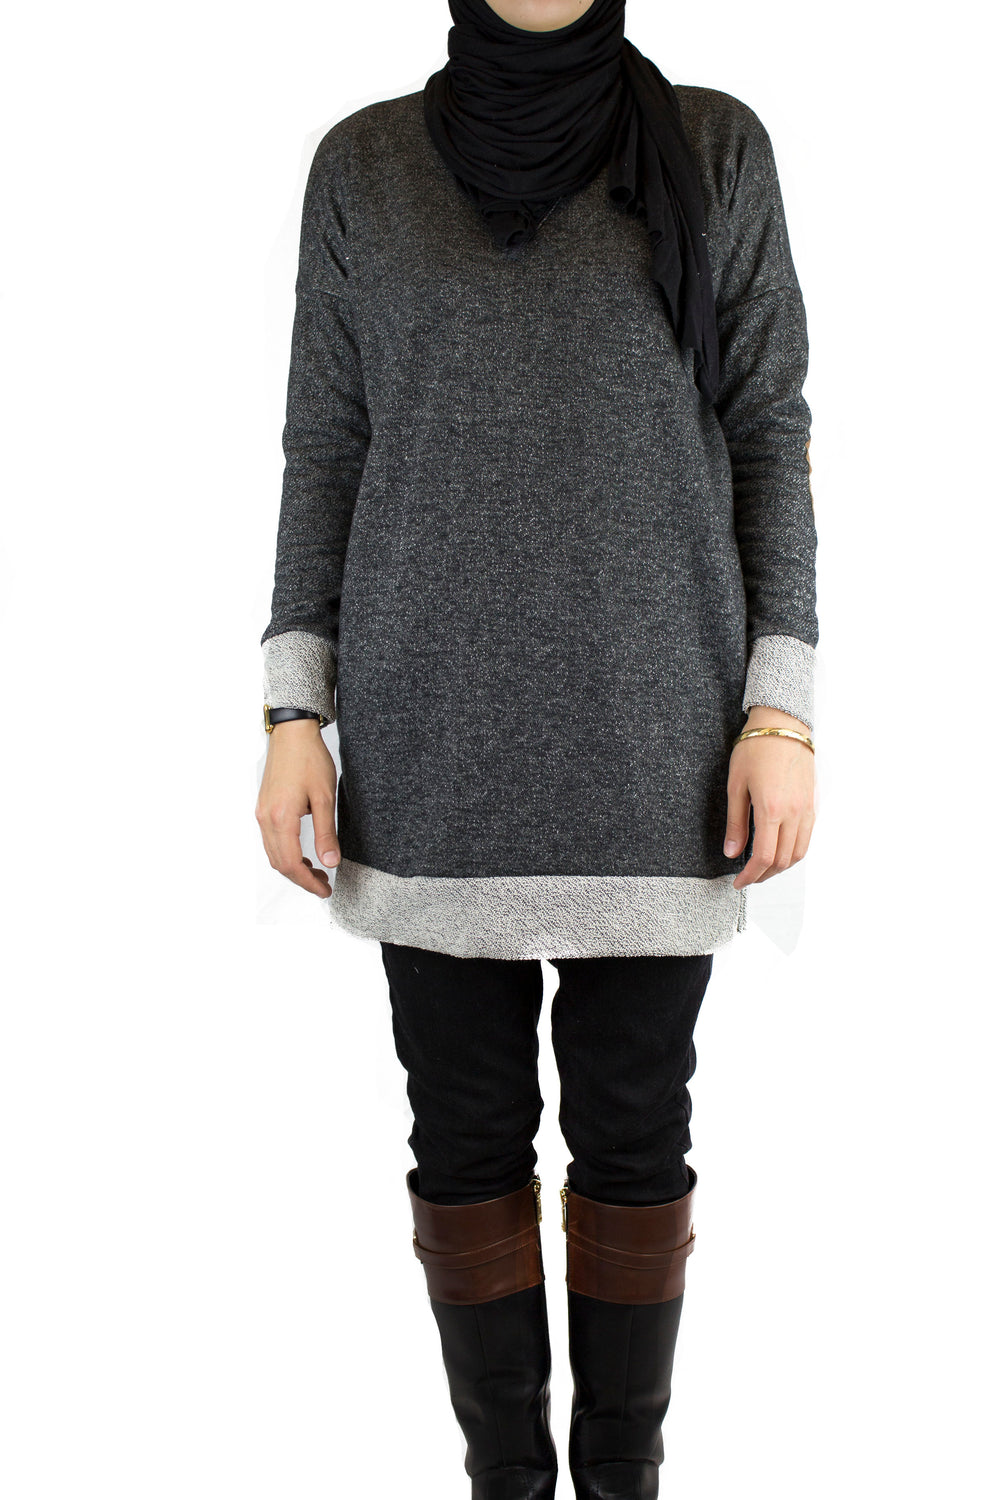 black long modest oversized sweater with brown elbow patches 